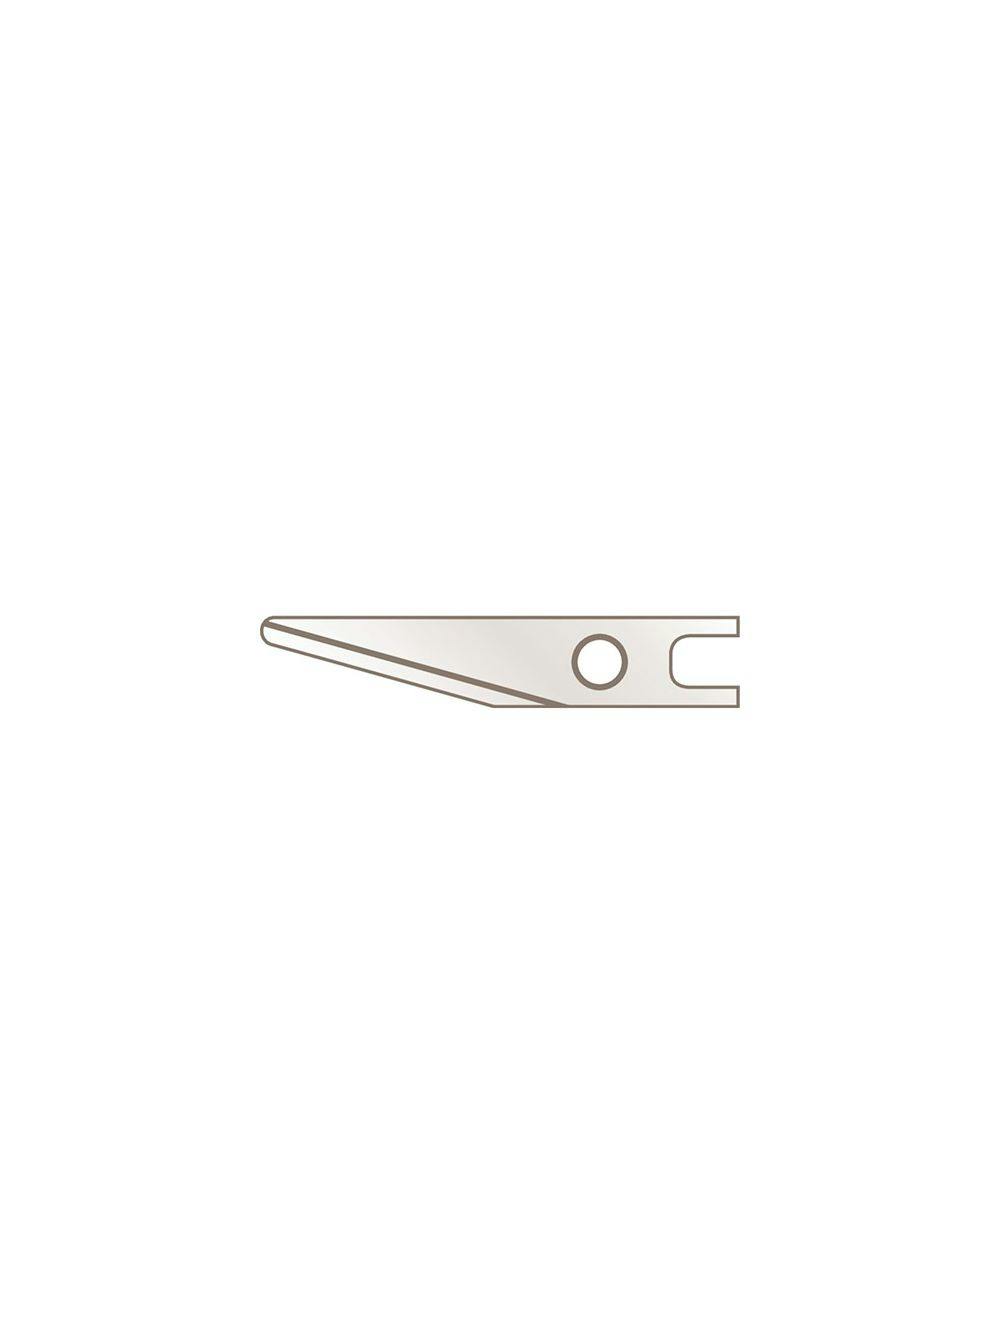 Martor Graphic Blade No. 8606, Dull Tip, Edges TiN Coated (Box Of 100)_0